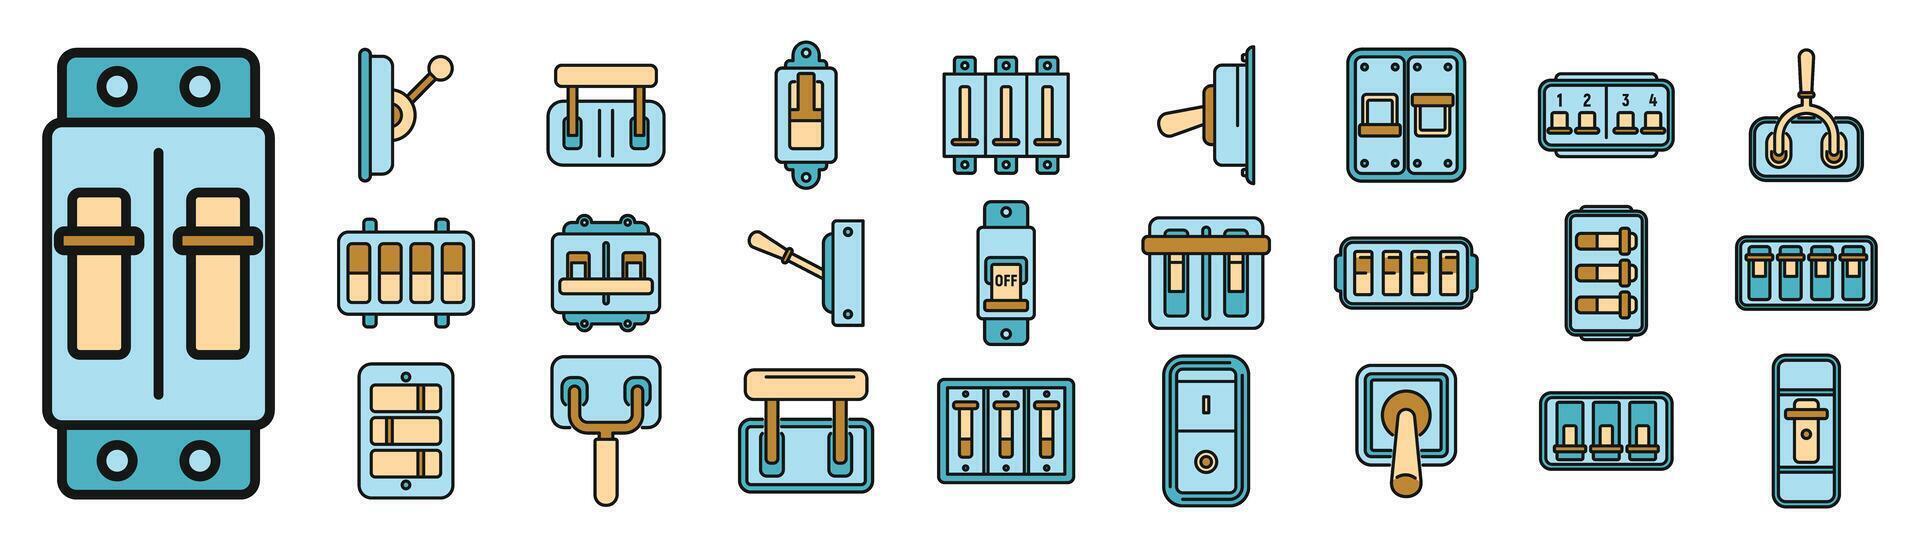 Breaker switch icons set vector color line